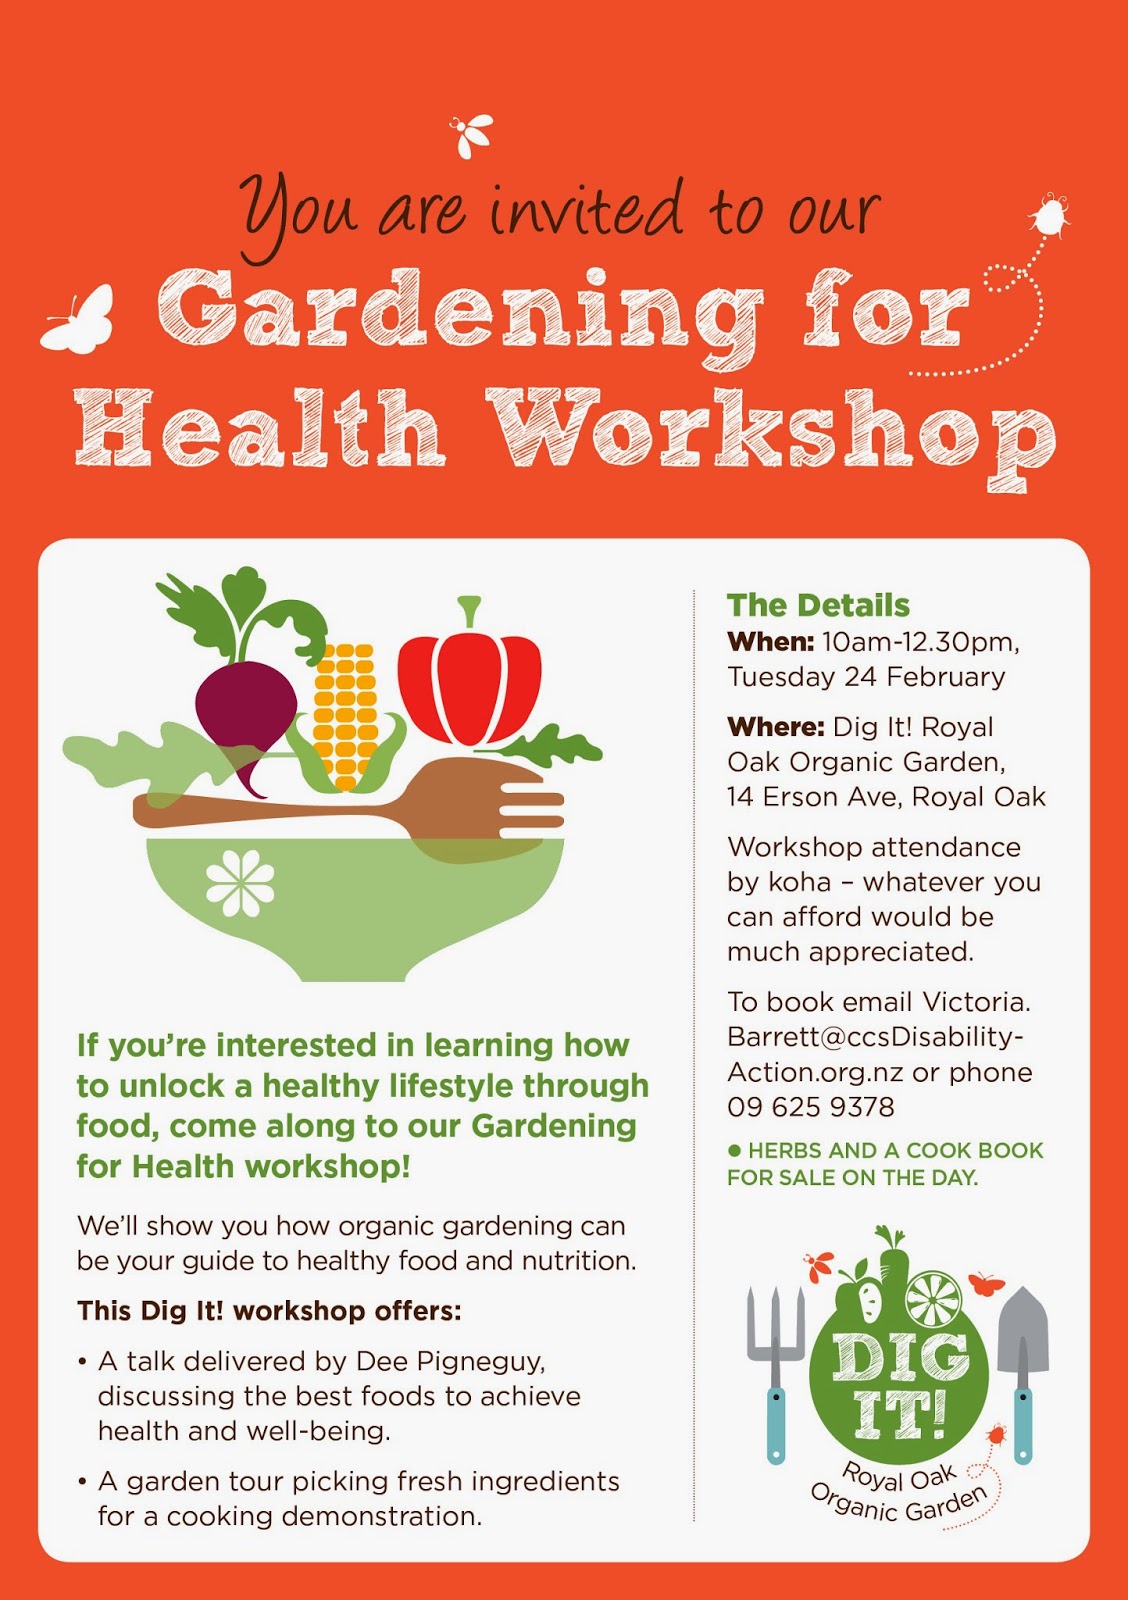 Our Gardening for Health Workshop flier. The text reads as follows: You are invited to our Gardening for Health Workshop! If you’re interested in learning how to unlock a healthy lifestyle through food, come along to our Gardening for Health workshop! We’ll show you how organic gardening can be your guide to healthy food and nutrition.  This Dig It! workshop offers:  - A talk delivered by Dee Pigneguy, discussing the best foods to achieve health and well-being. - A garden tour picking fresh ingredients for a cooking demonstration. The Details When: 10am – 12.30pm  Tuesday 24 February Where: Dig It! Royal Oak Organic Garden, 14 Erson Ave, Royal Oak Workshop attendance by koha – whatever you can afford would be much appreciated.  Herbs and a cook book for sale on the day.  To book email Victoria.Barrett@ccsDisabilityAction.org.nz or phone 09 625 9378